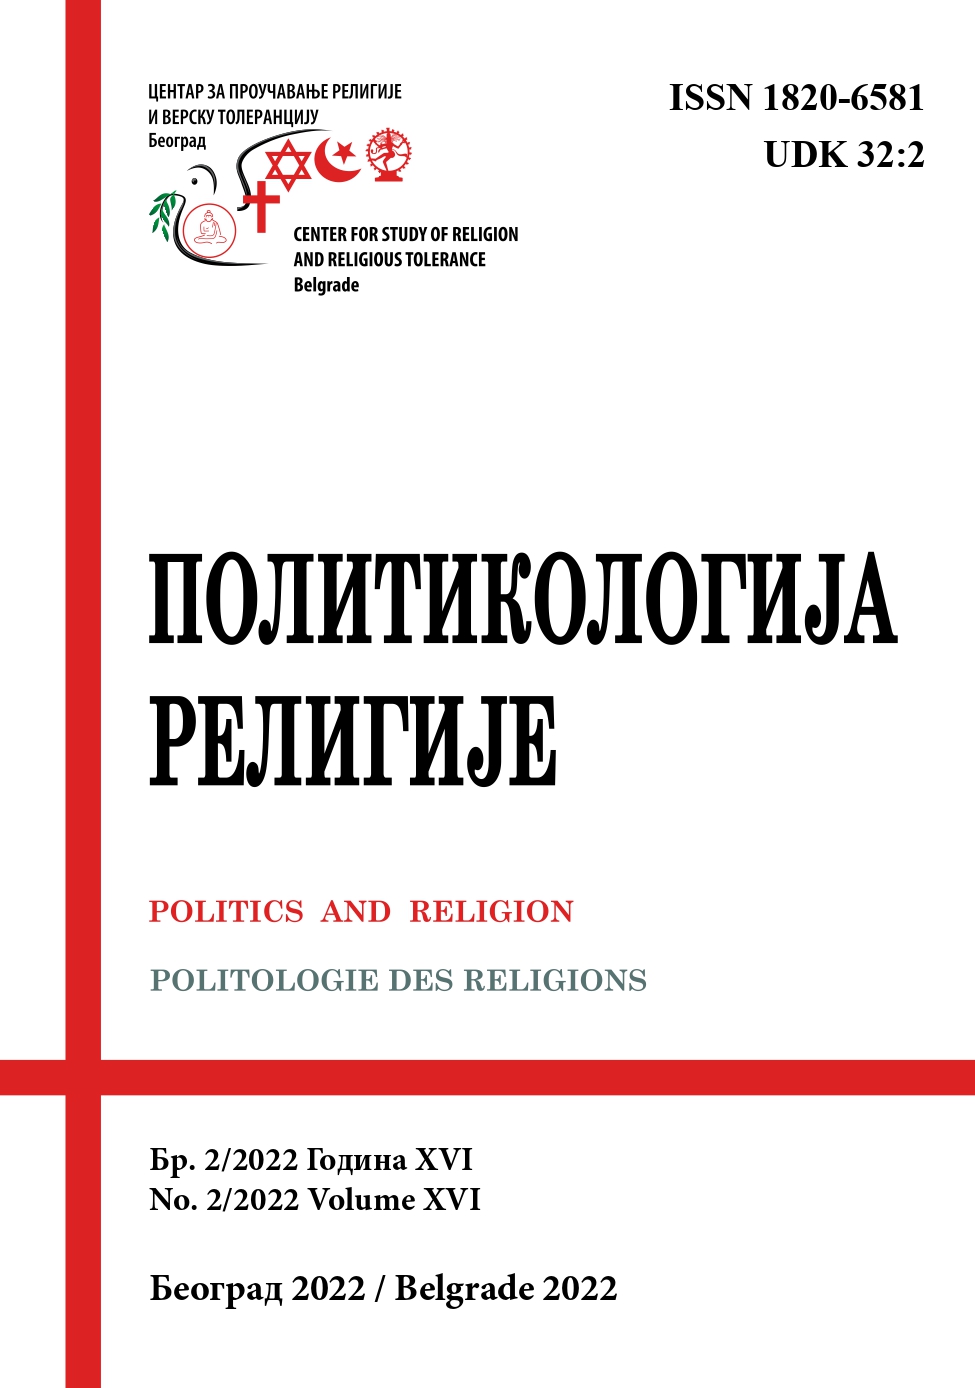 NEGOTIATING THE RIGHT FOR EXTERNAL RELATIONS: THE CASE OF ORTHODOX COMMUNITY IN UKRAINE